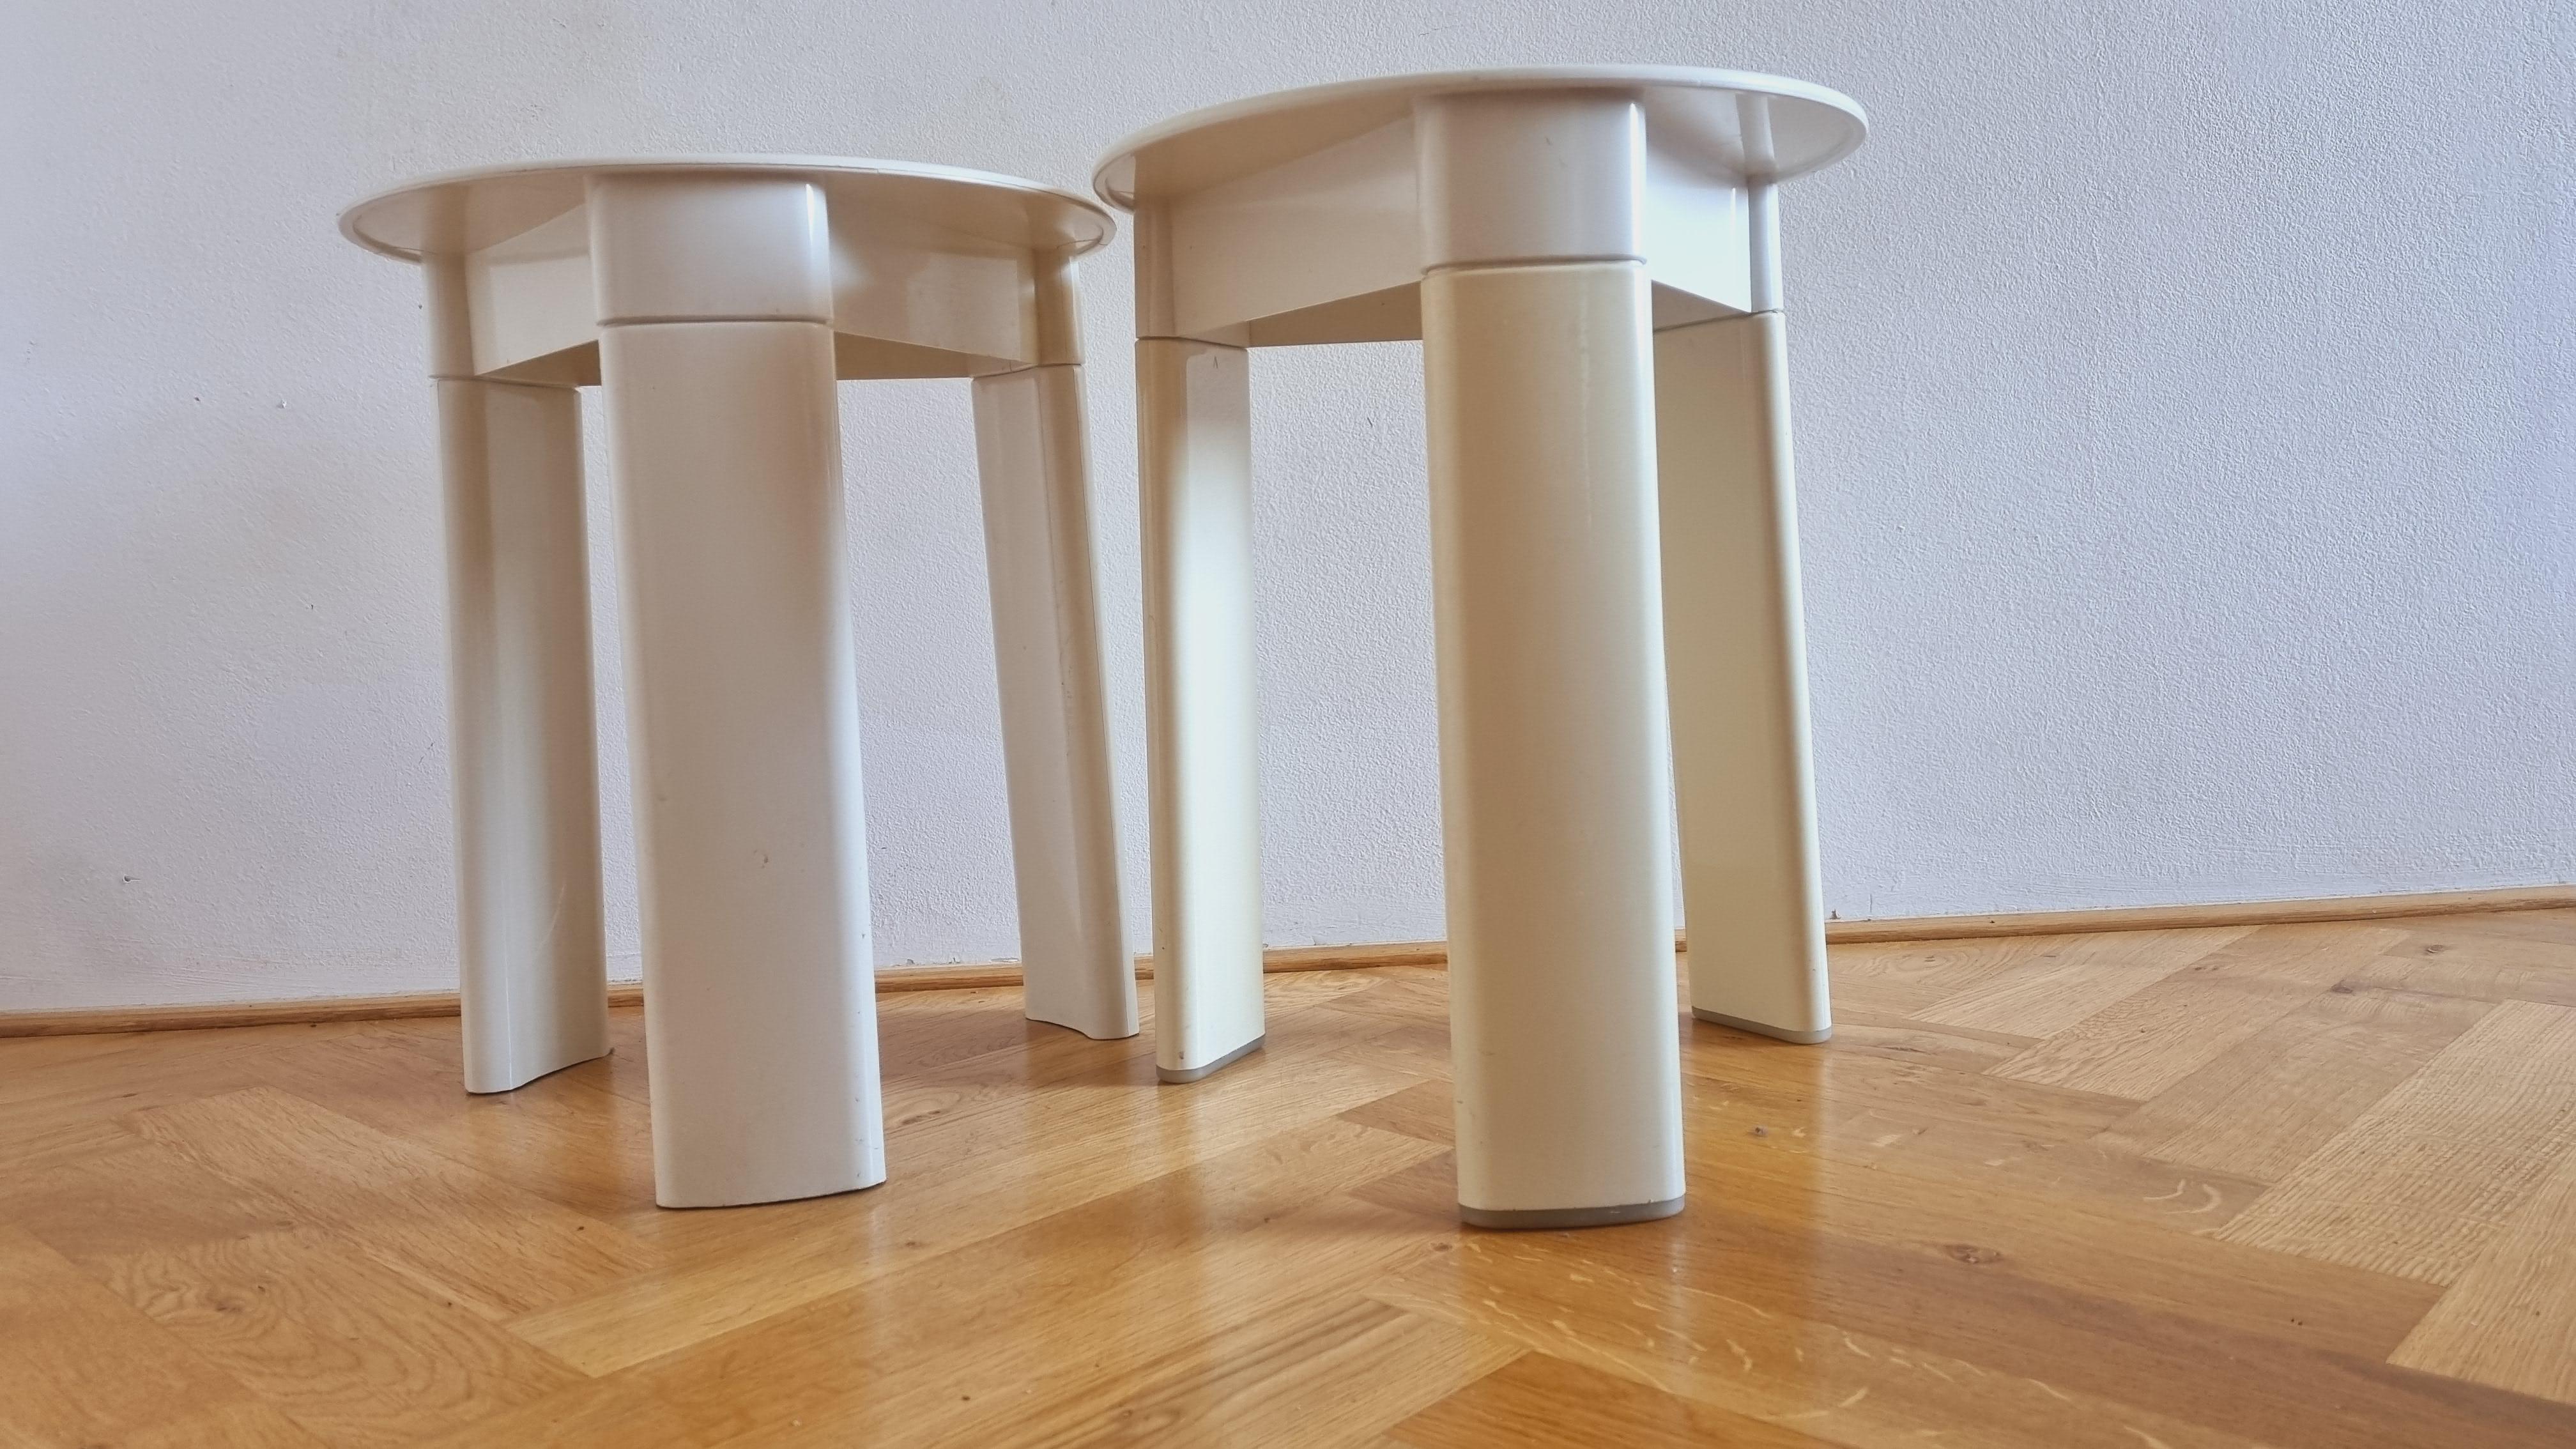 Pair of Midcentury Stools or Side Tables Trio, Olaf Von Bohr, Gedy, Italy, 1970s For Sale 3